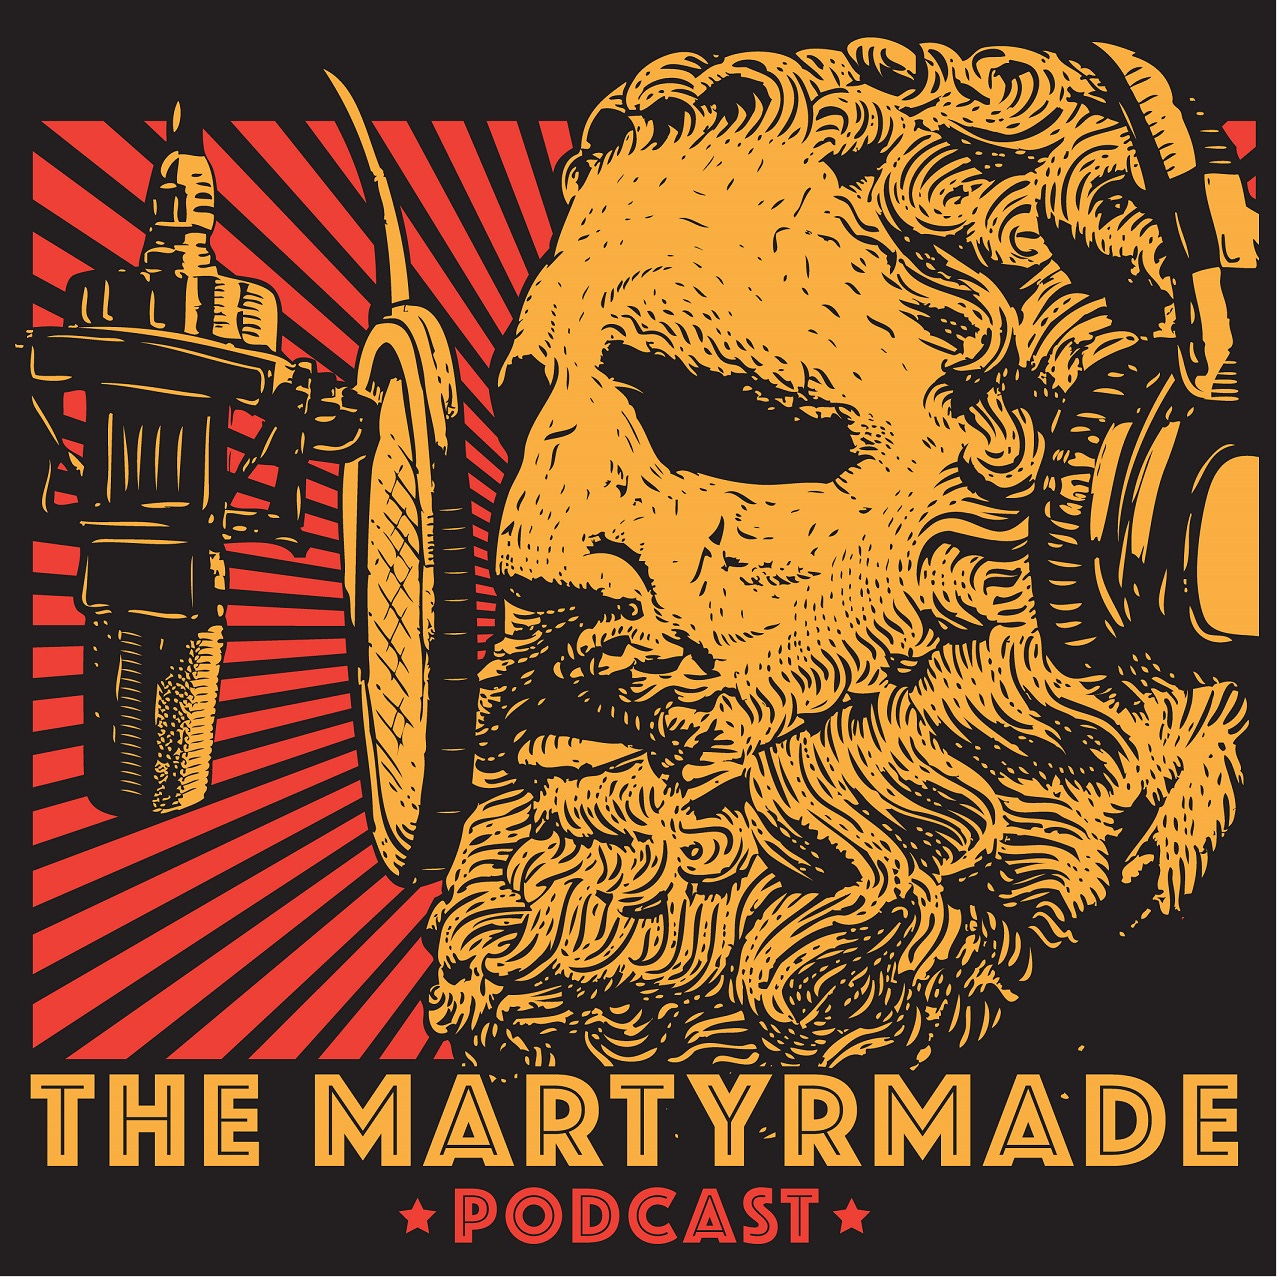 MartyrMade - Fever dreams from the human story